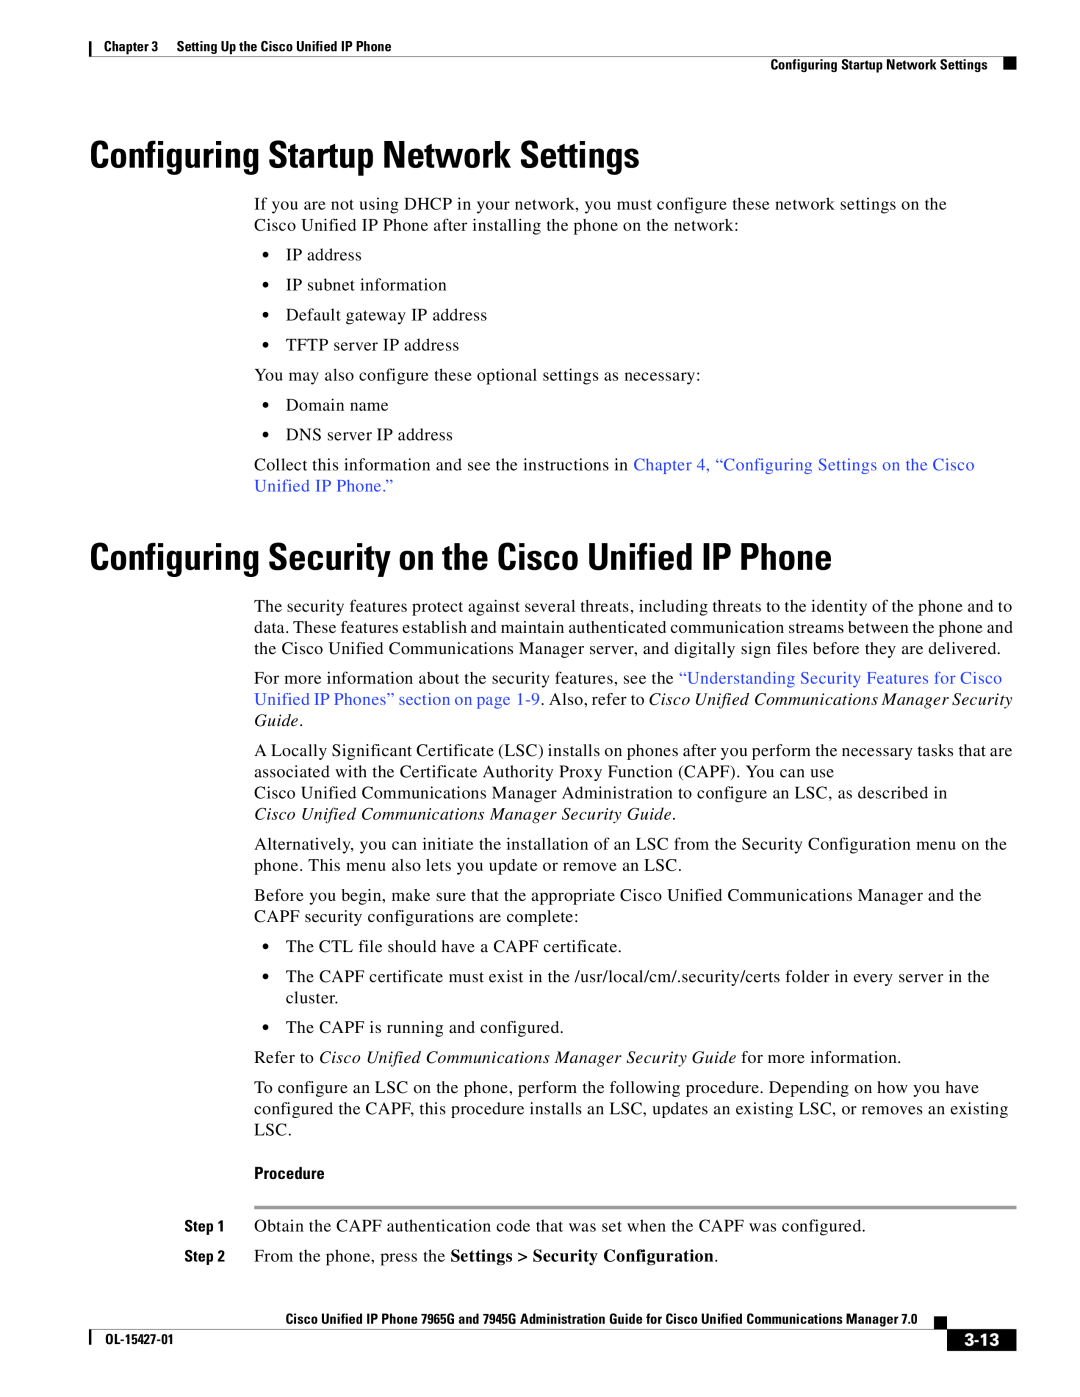 Cisco Systems 7945G, 7965G Configuring Startup Network Settings, Configuring Security on the Cisco Unified IP Phone, 3-13 